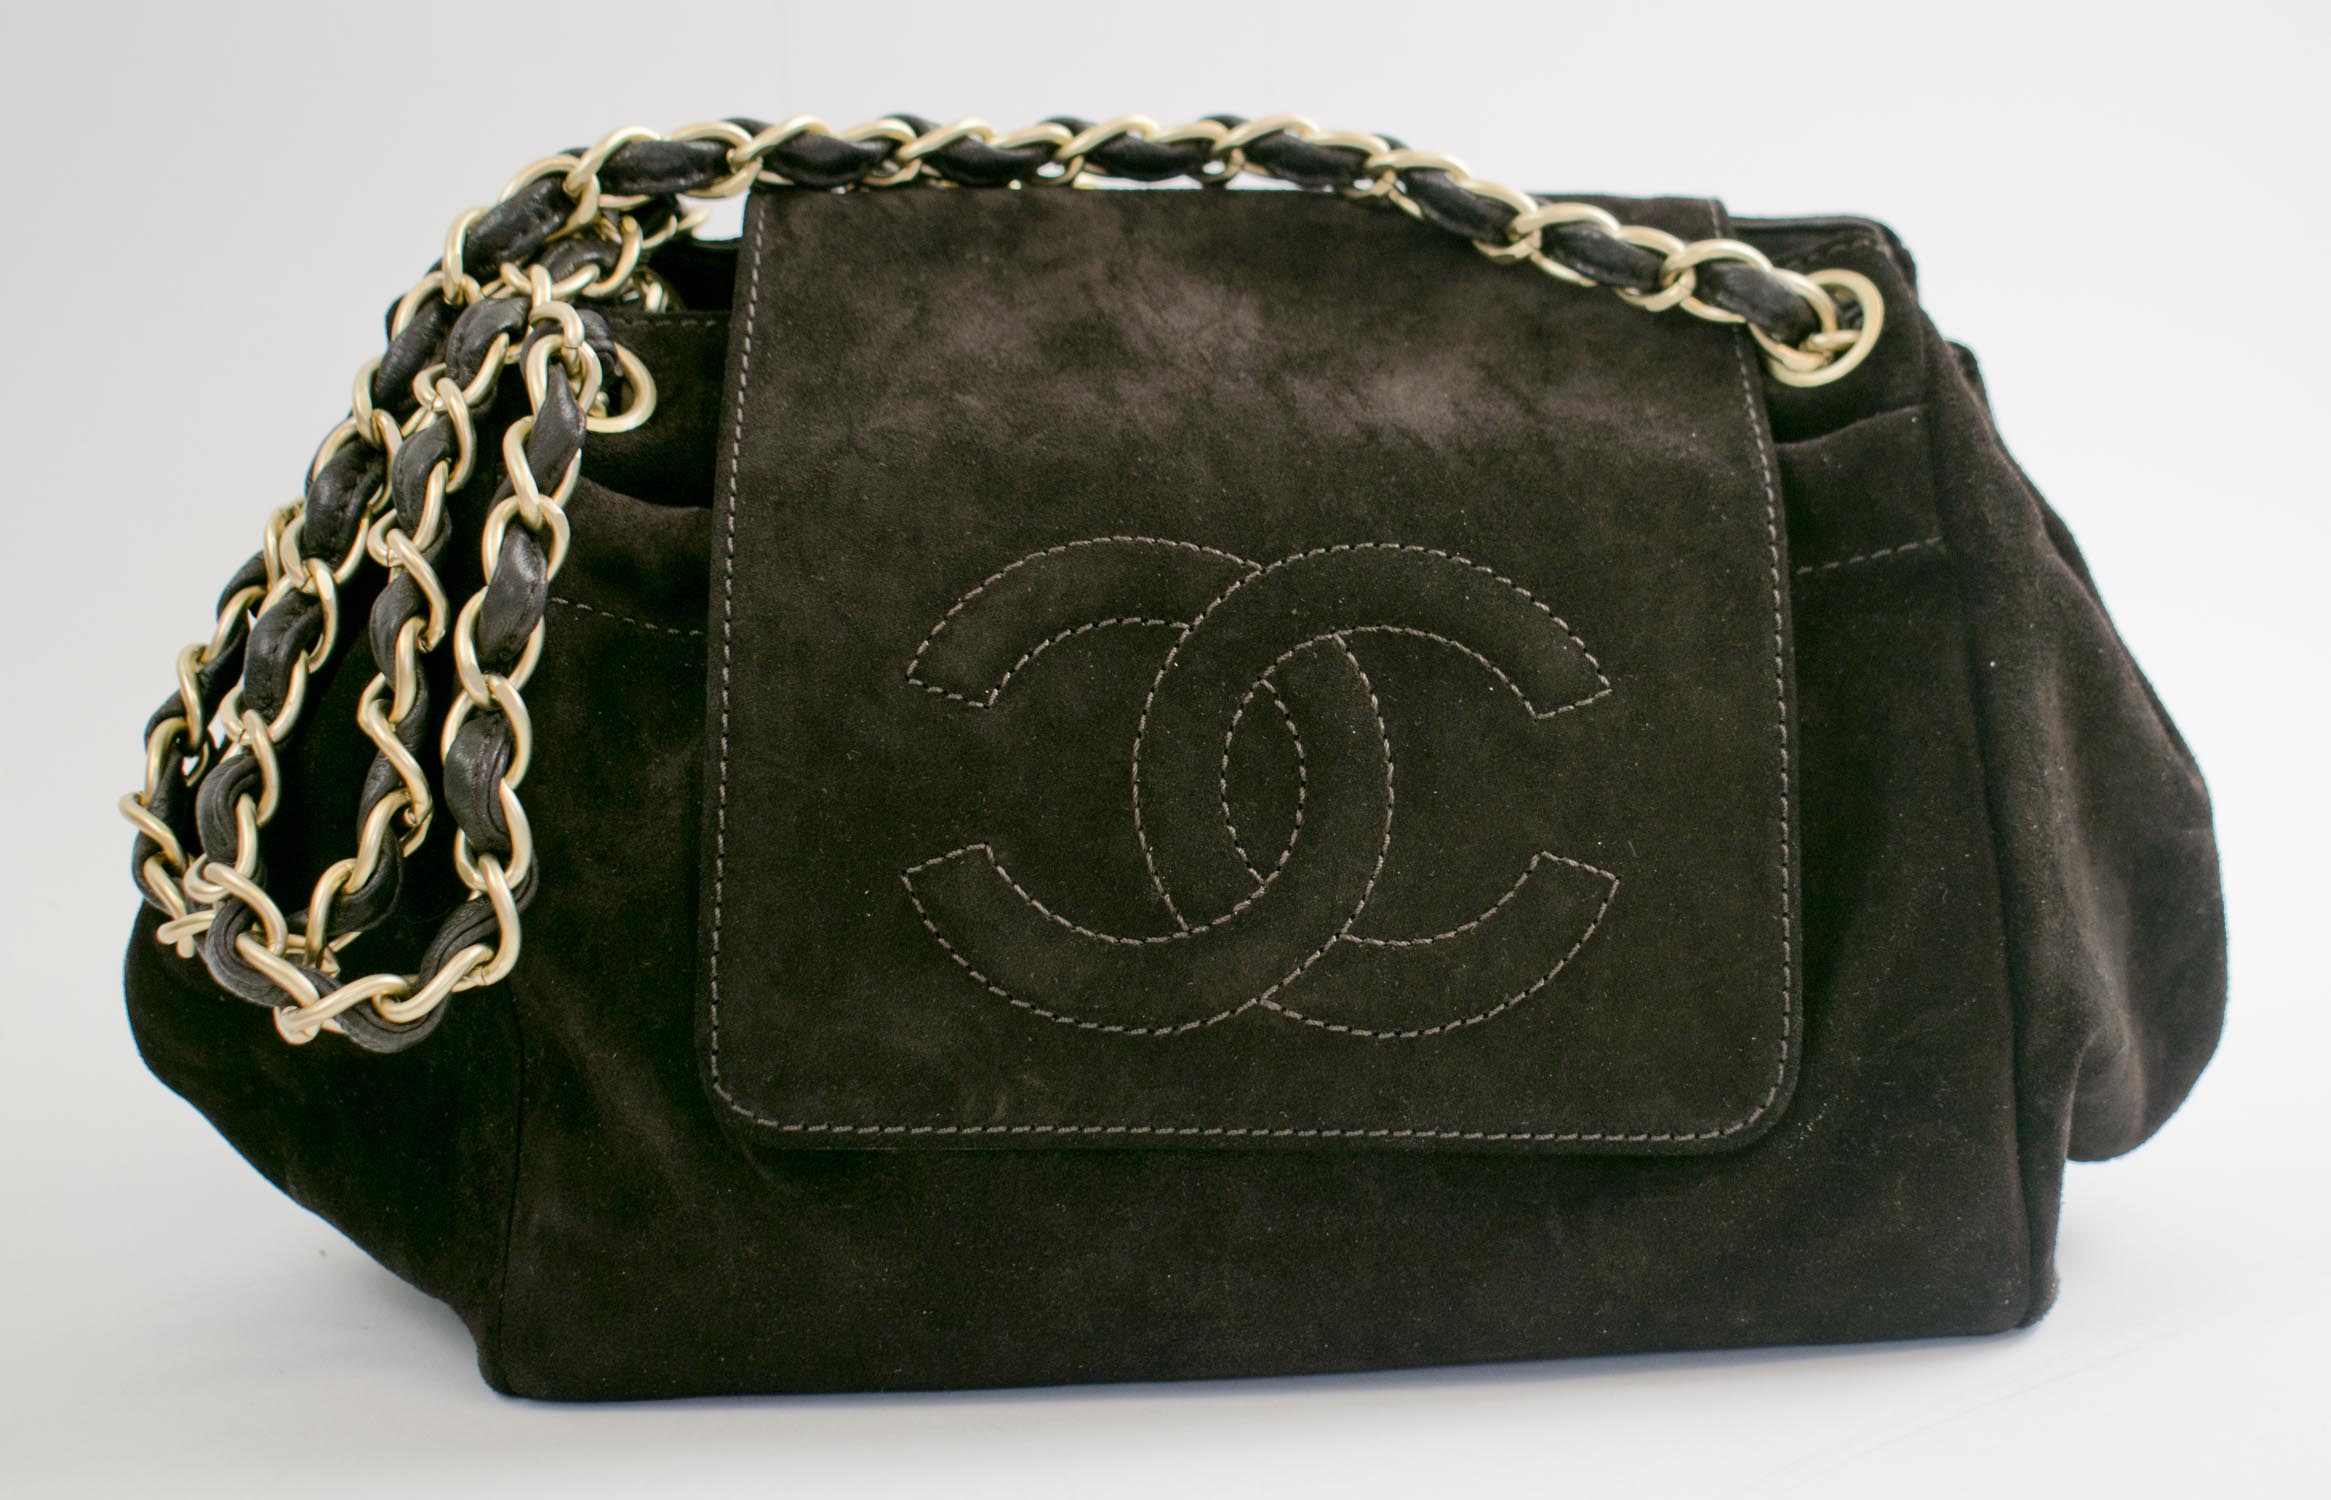 CHANEL ACCORDION FLAP BAG, brown suede with intertwined CC logo on the flap,  snap closure, monogram fabric lining and leather interior, interwoven chain  strap, worn single or double strap, gold tone hardware